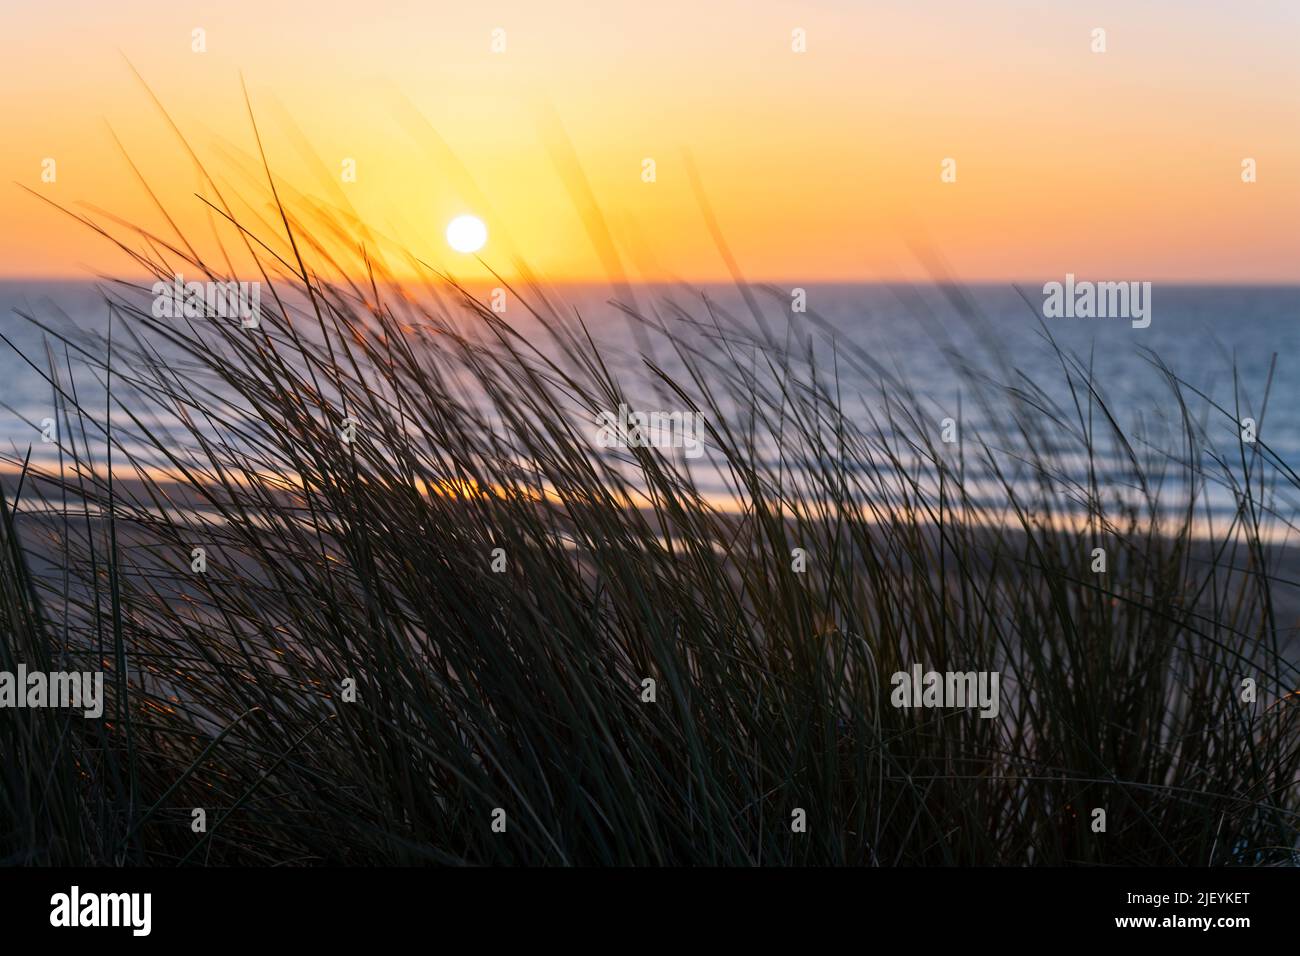 Sand dunes grass in the wind at sunset along the North Sea beach of Oostende (Ostend), Flanders, Belgium. Stock Photo